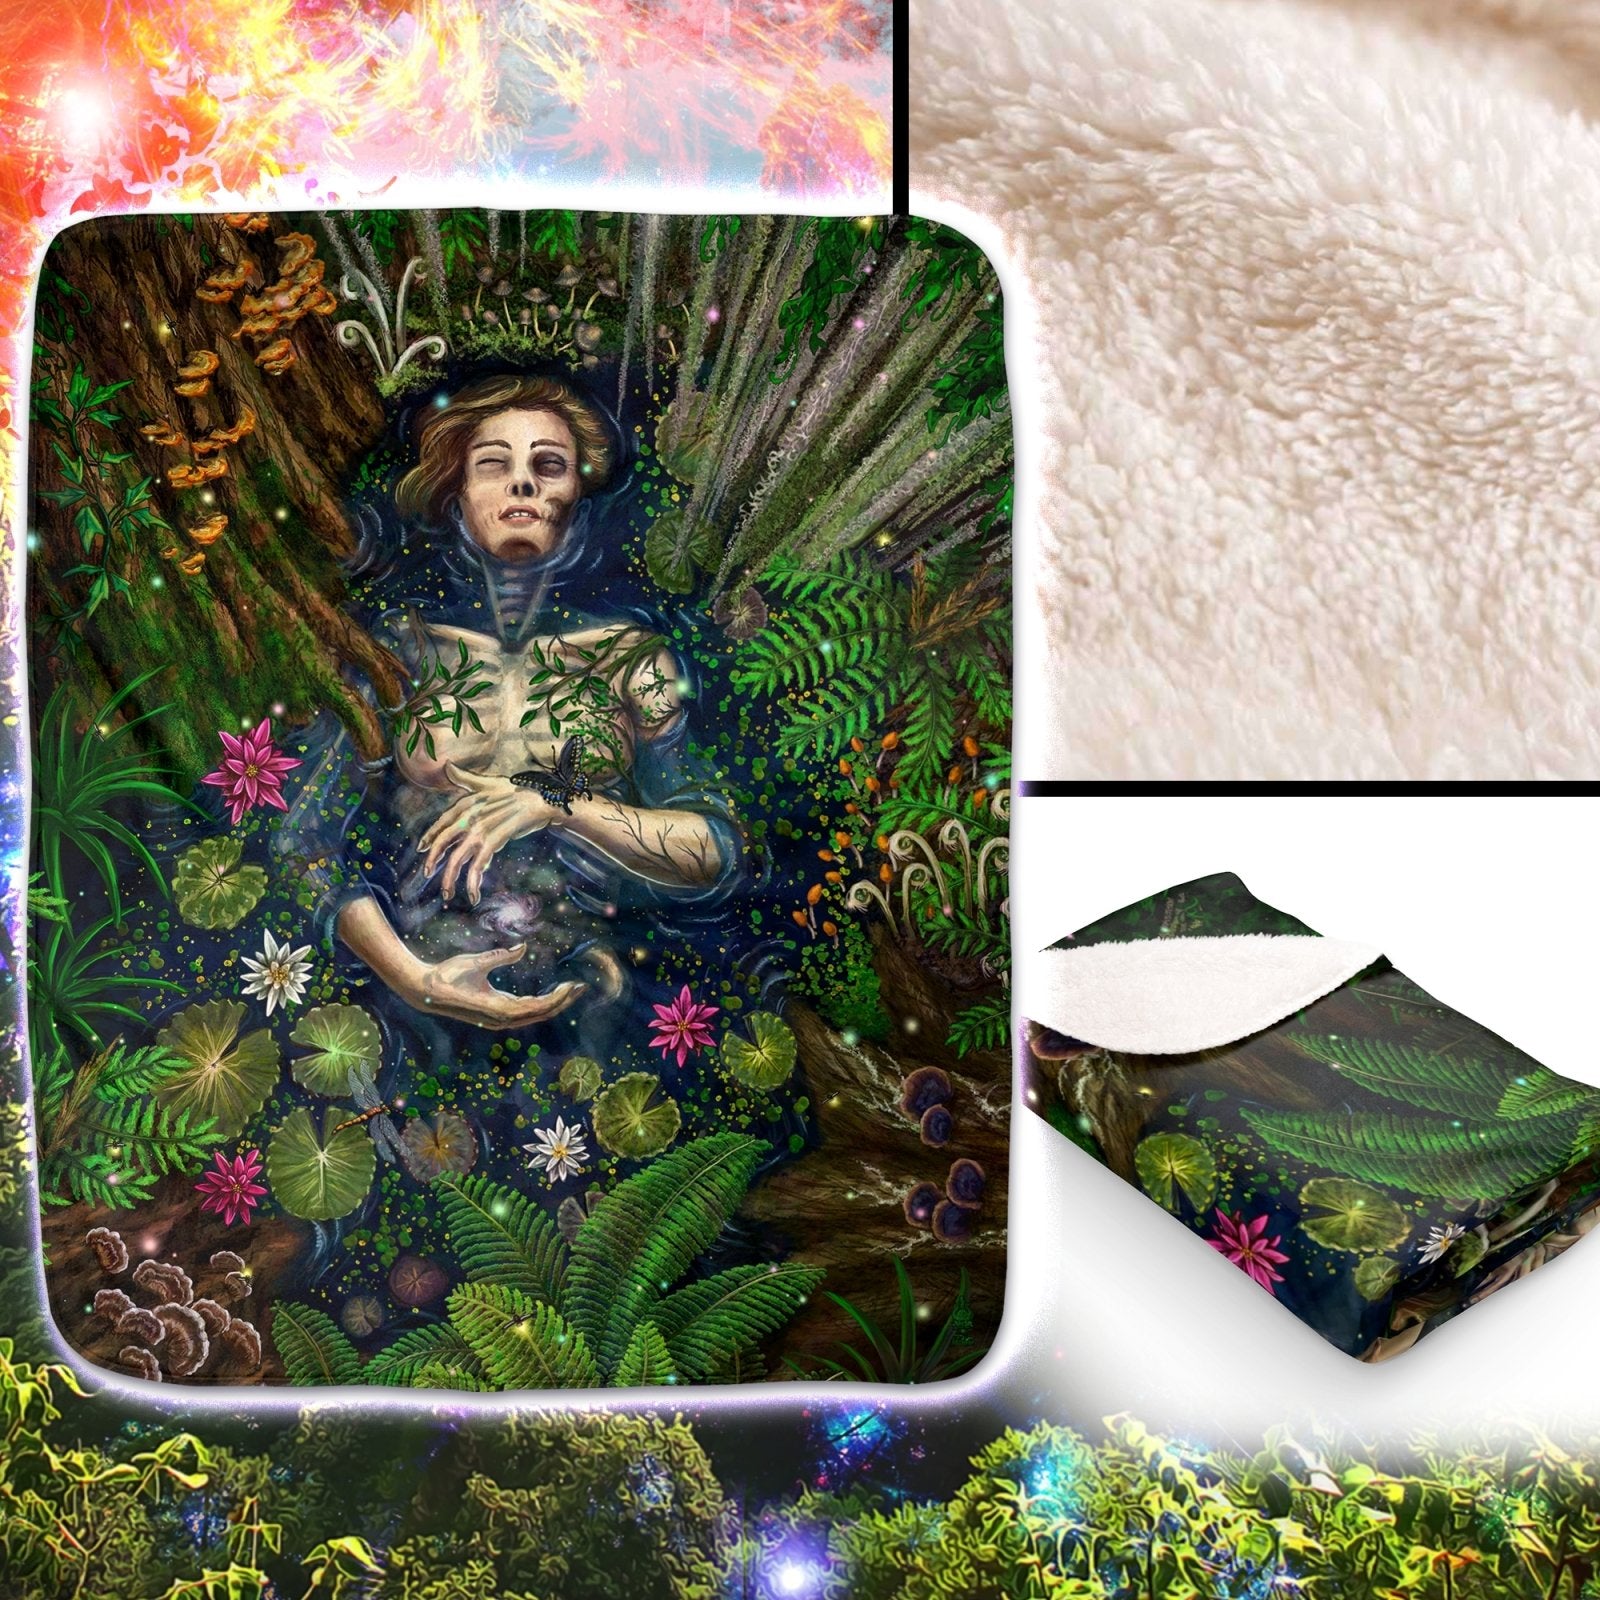 Cycle Throw Fleece Blanket, Pagan Art, Indie and Ecclectic Decor, Eclectic and Funky Gift - Nature - Abysm Internal